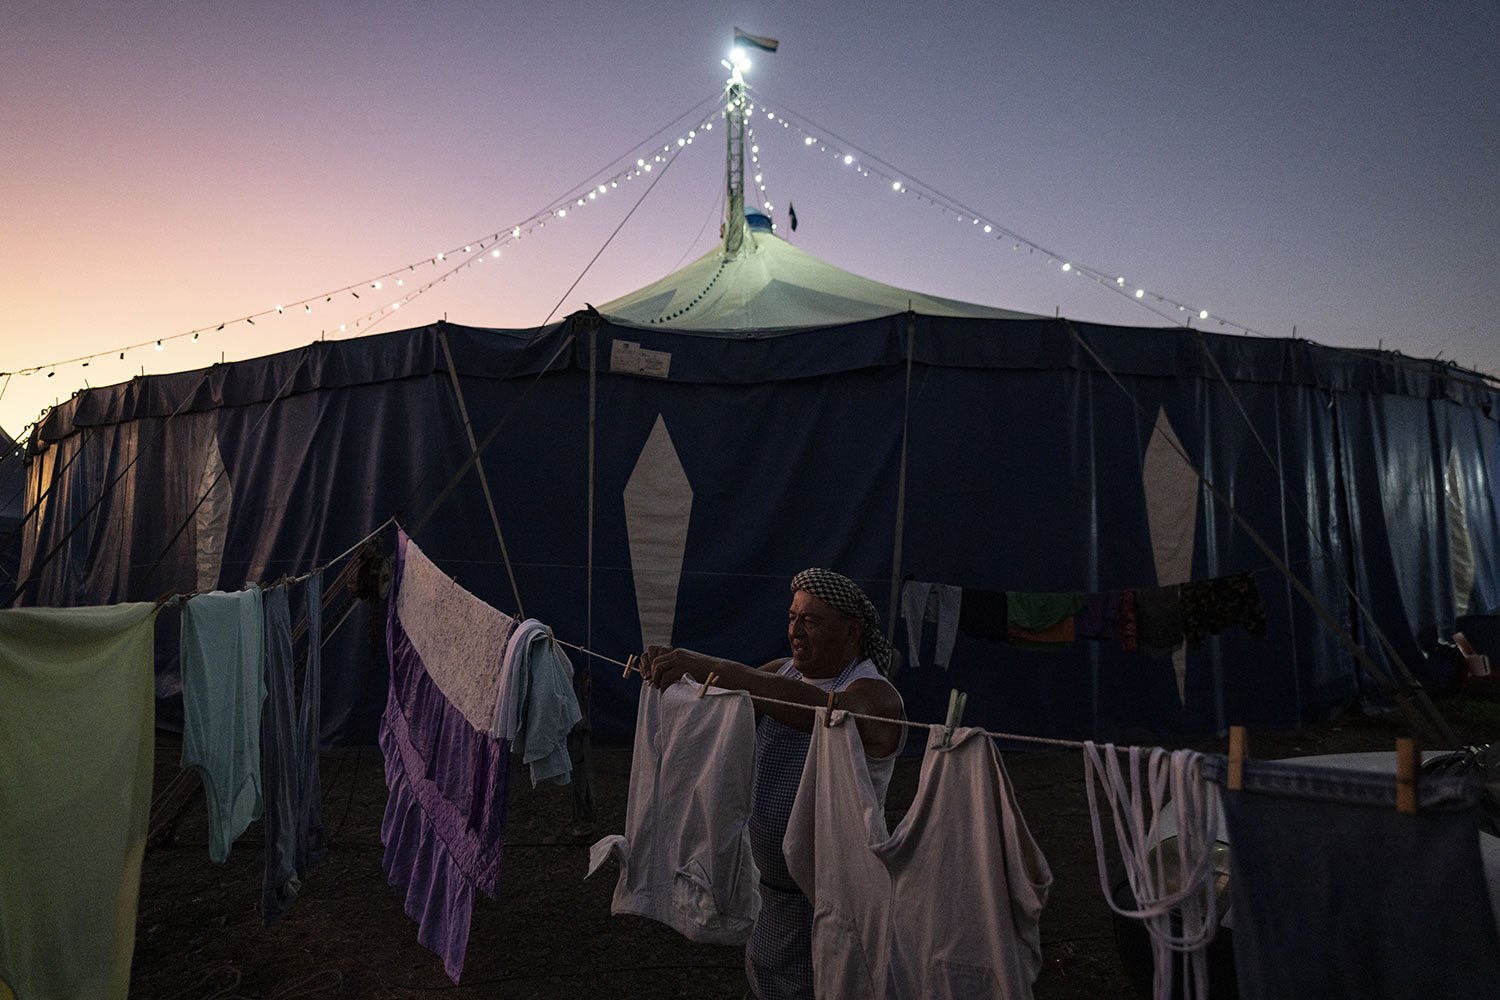  Timoteo Circus performer Arturo Peña hangs his wash on a clothesline on the outskirts of Santiago, Chile, Saturday, Dec. 10, 2022. Peña performs the part of  “The Crazy Purse Lady,” a role that has allowed him to escape life in the countryside and g